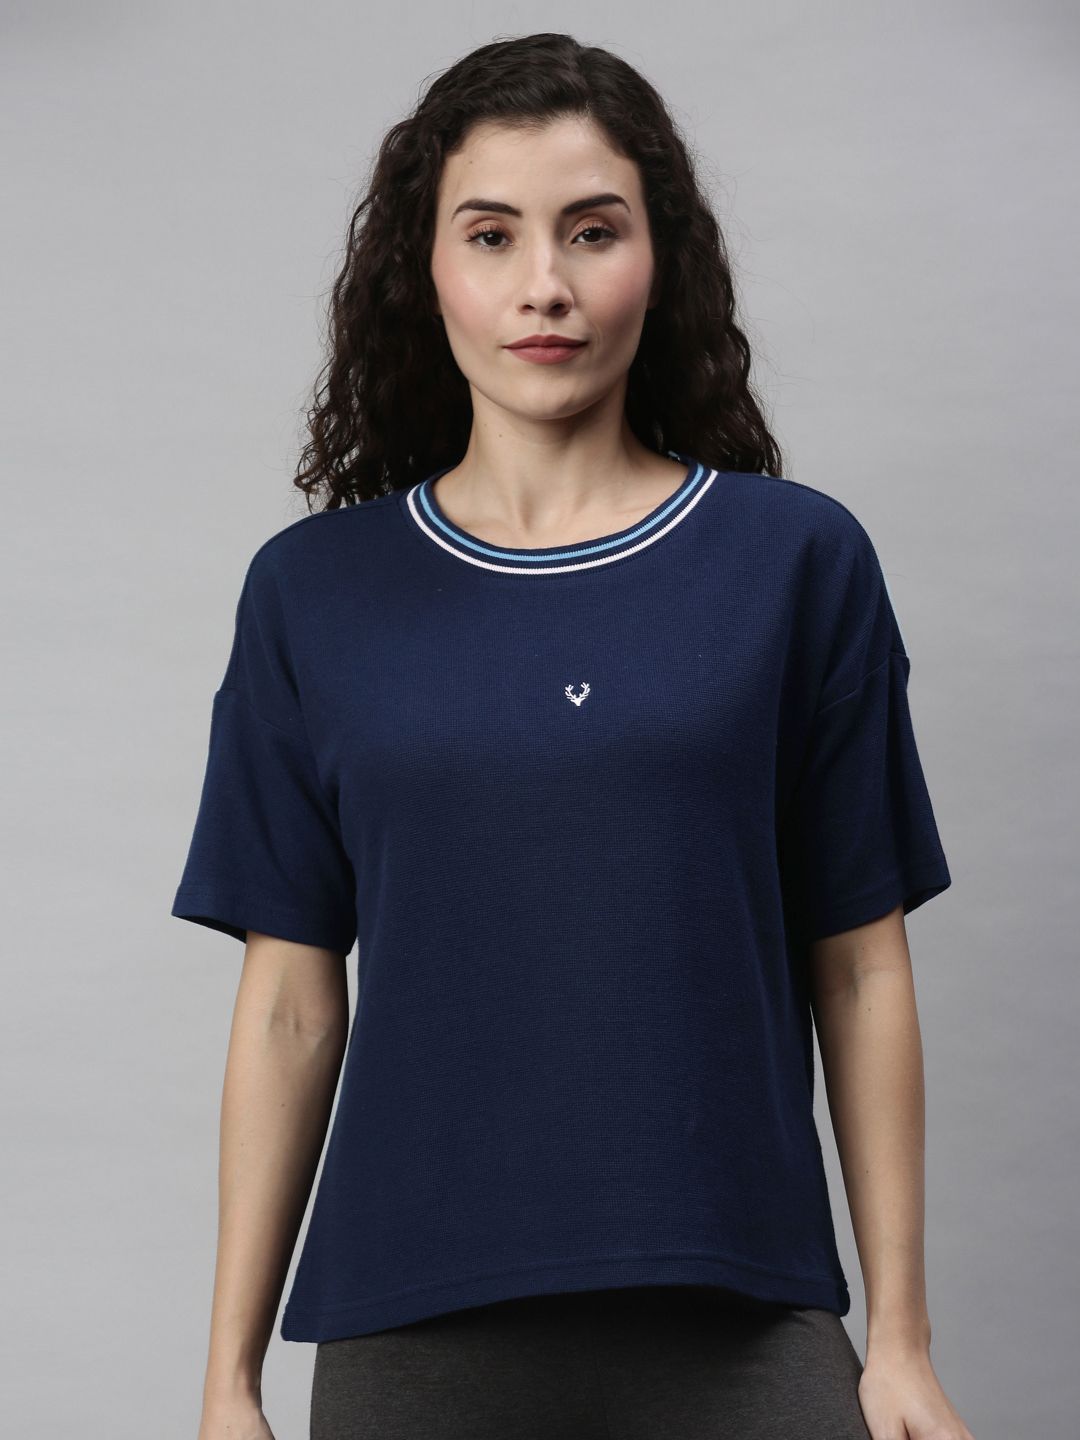 Allen Solly Woman Navy Blue Solid Round Neck Cotton Lounge T-shirt Price in India